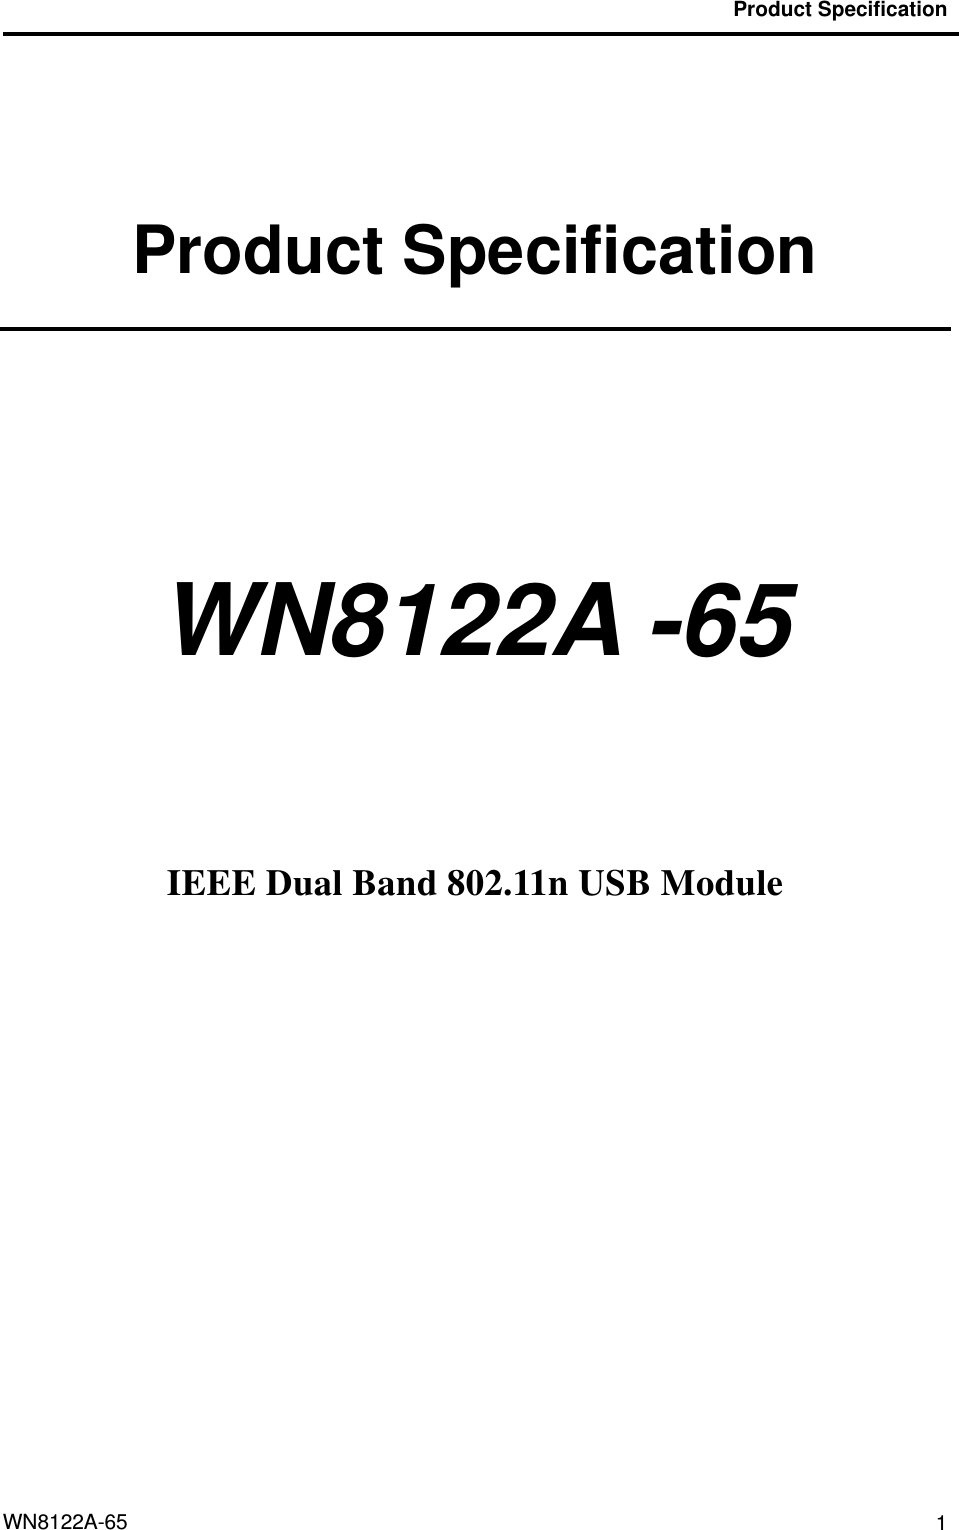                                           Product Specification                                              WN8122A-65  1 Product Specification   WN8122A -65     IEEE Dual Band 802.11n USB Module     